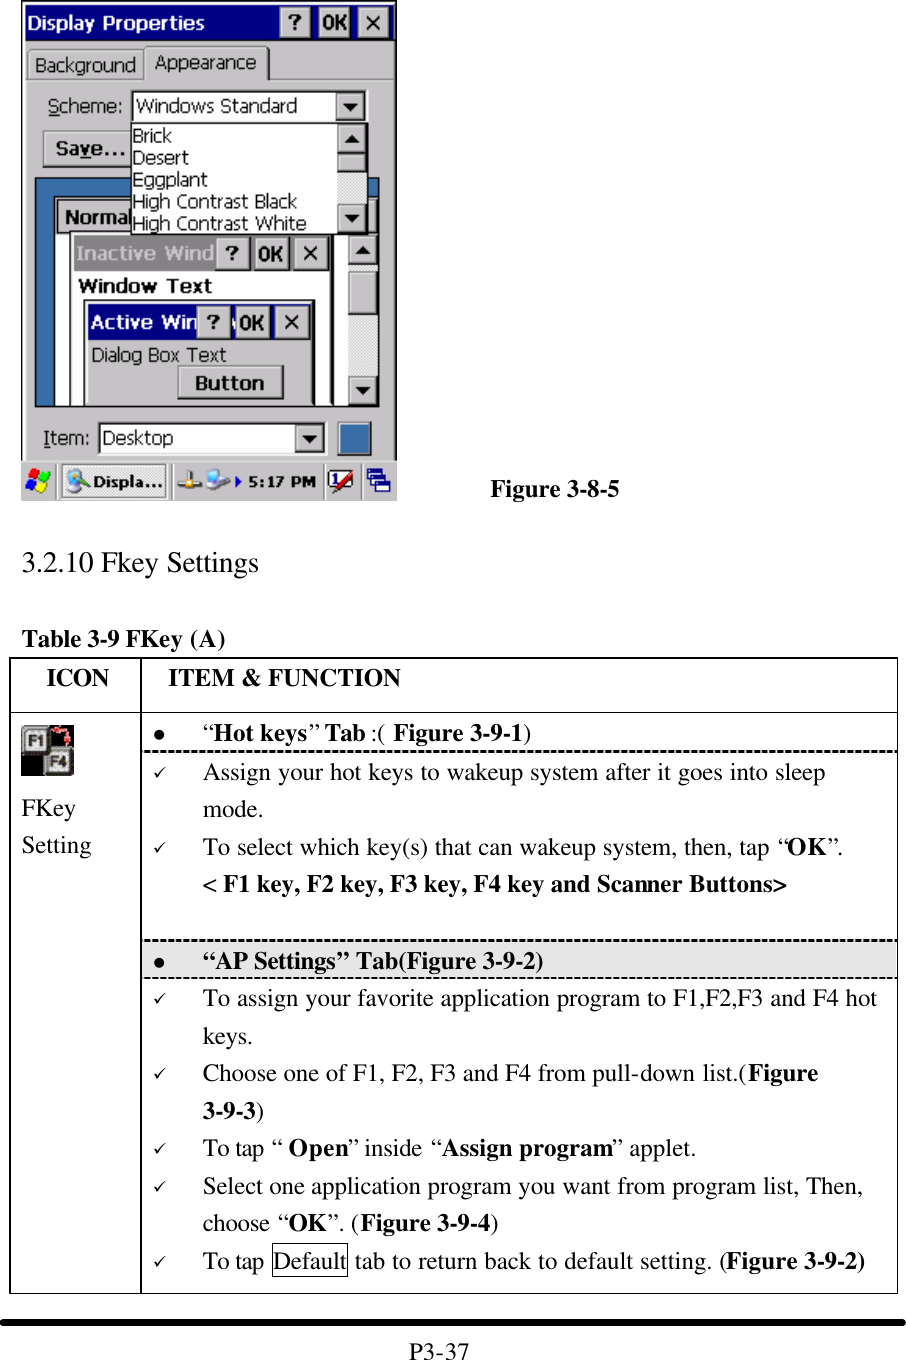                     Figure 3-8-5  3.2.10 Fkey Settings  Table 3-9 FKey (A)   ICON  ITEM &amp; FUNCTION l “Hot keys” Tab :( Figure 3-9-1)   ü Assign your hot keys to wakeup system after it goes into sleep mode. ü To select which key(s) that can wakeup system, then, tap “OK”. &lt; F1 key, F2 key, F3 key, F4 key and Scanner Buttons&gt;   l “AP Settings” Tab(Figure 3-9-2)  FKey Setting  ü To assign your favorite application program to F1,F2,F3 and F4 hot keys. ü Choose one of F1, F2, F3 and F4 from pull-down list.(Figure 3-9-3) ü To tap “ Open” inside “Assign program” applet.   ü Select one application program you want from program list, Then, choose “OK”. (Figure 3-9-4) ü To tap Default tab to return back to default setting. (Figure 3-9-2)  P3-37 